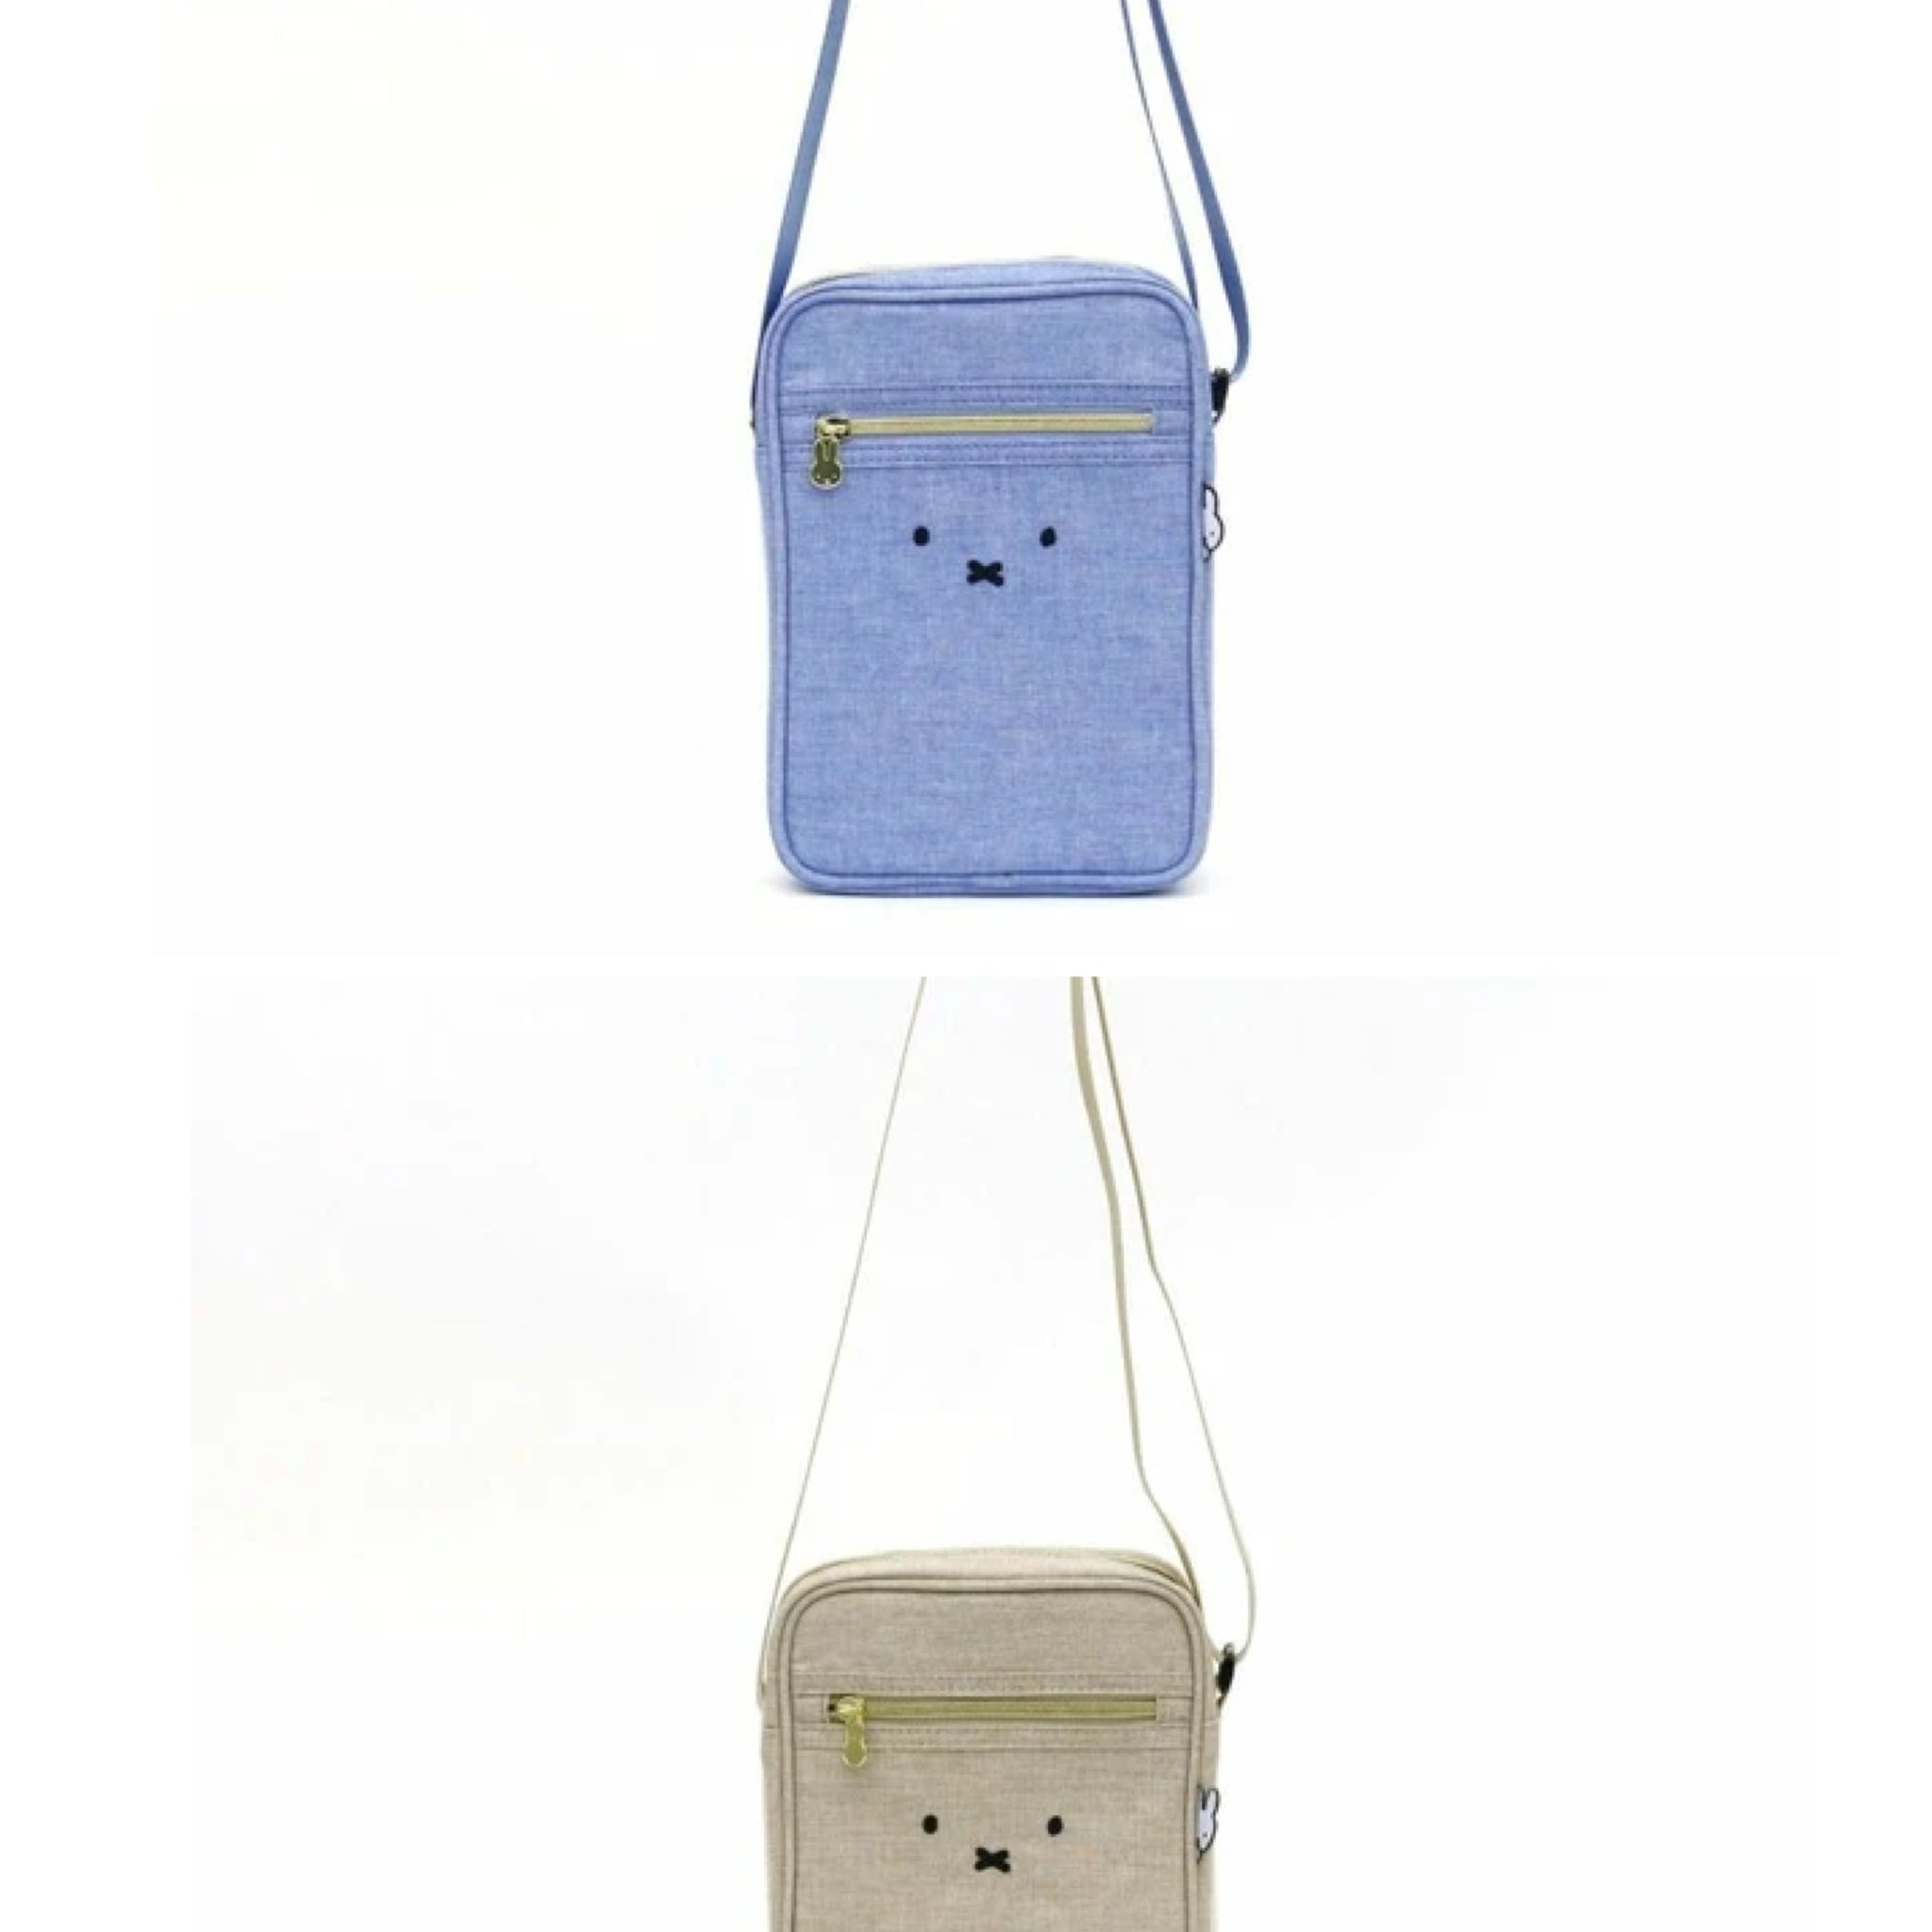 Miffy Square Cross Body Bag - Light Blue and Beige (C-3)